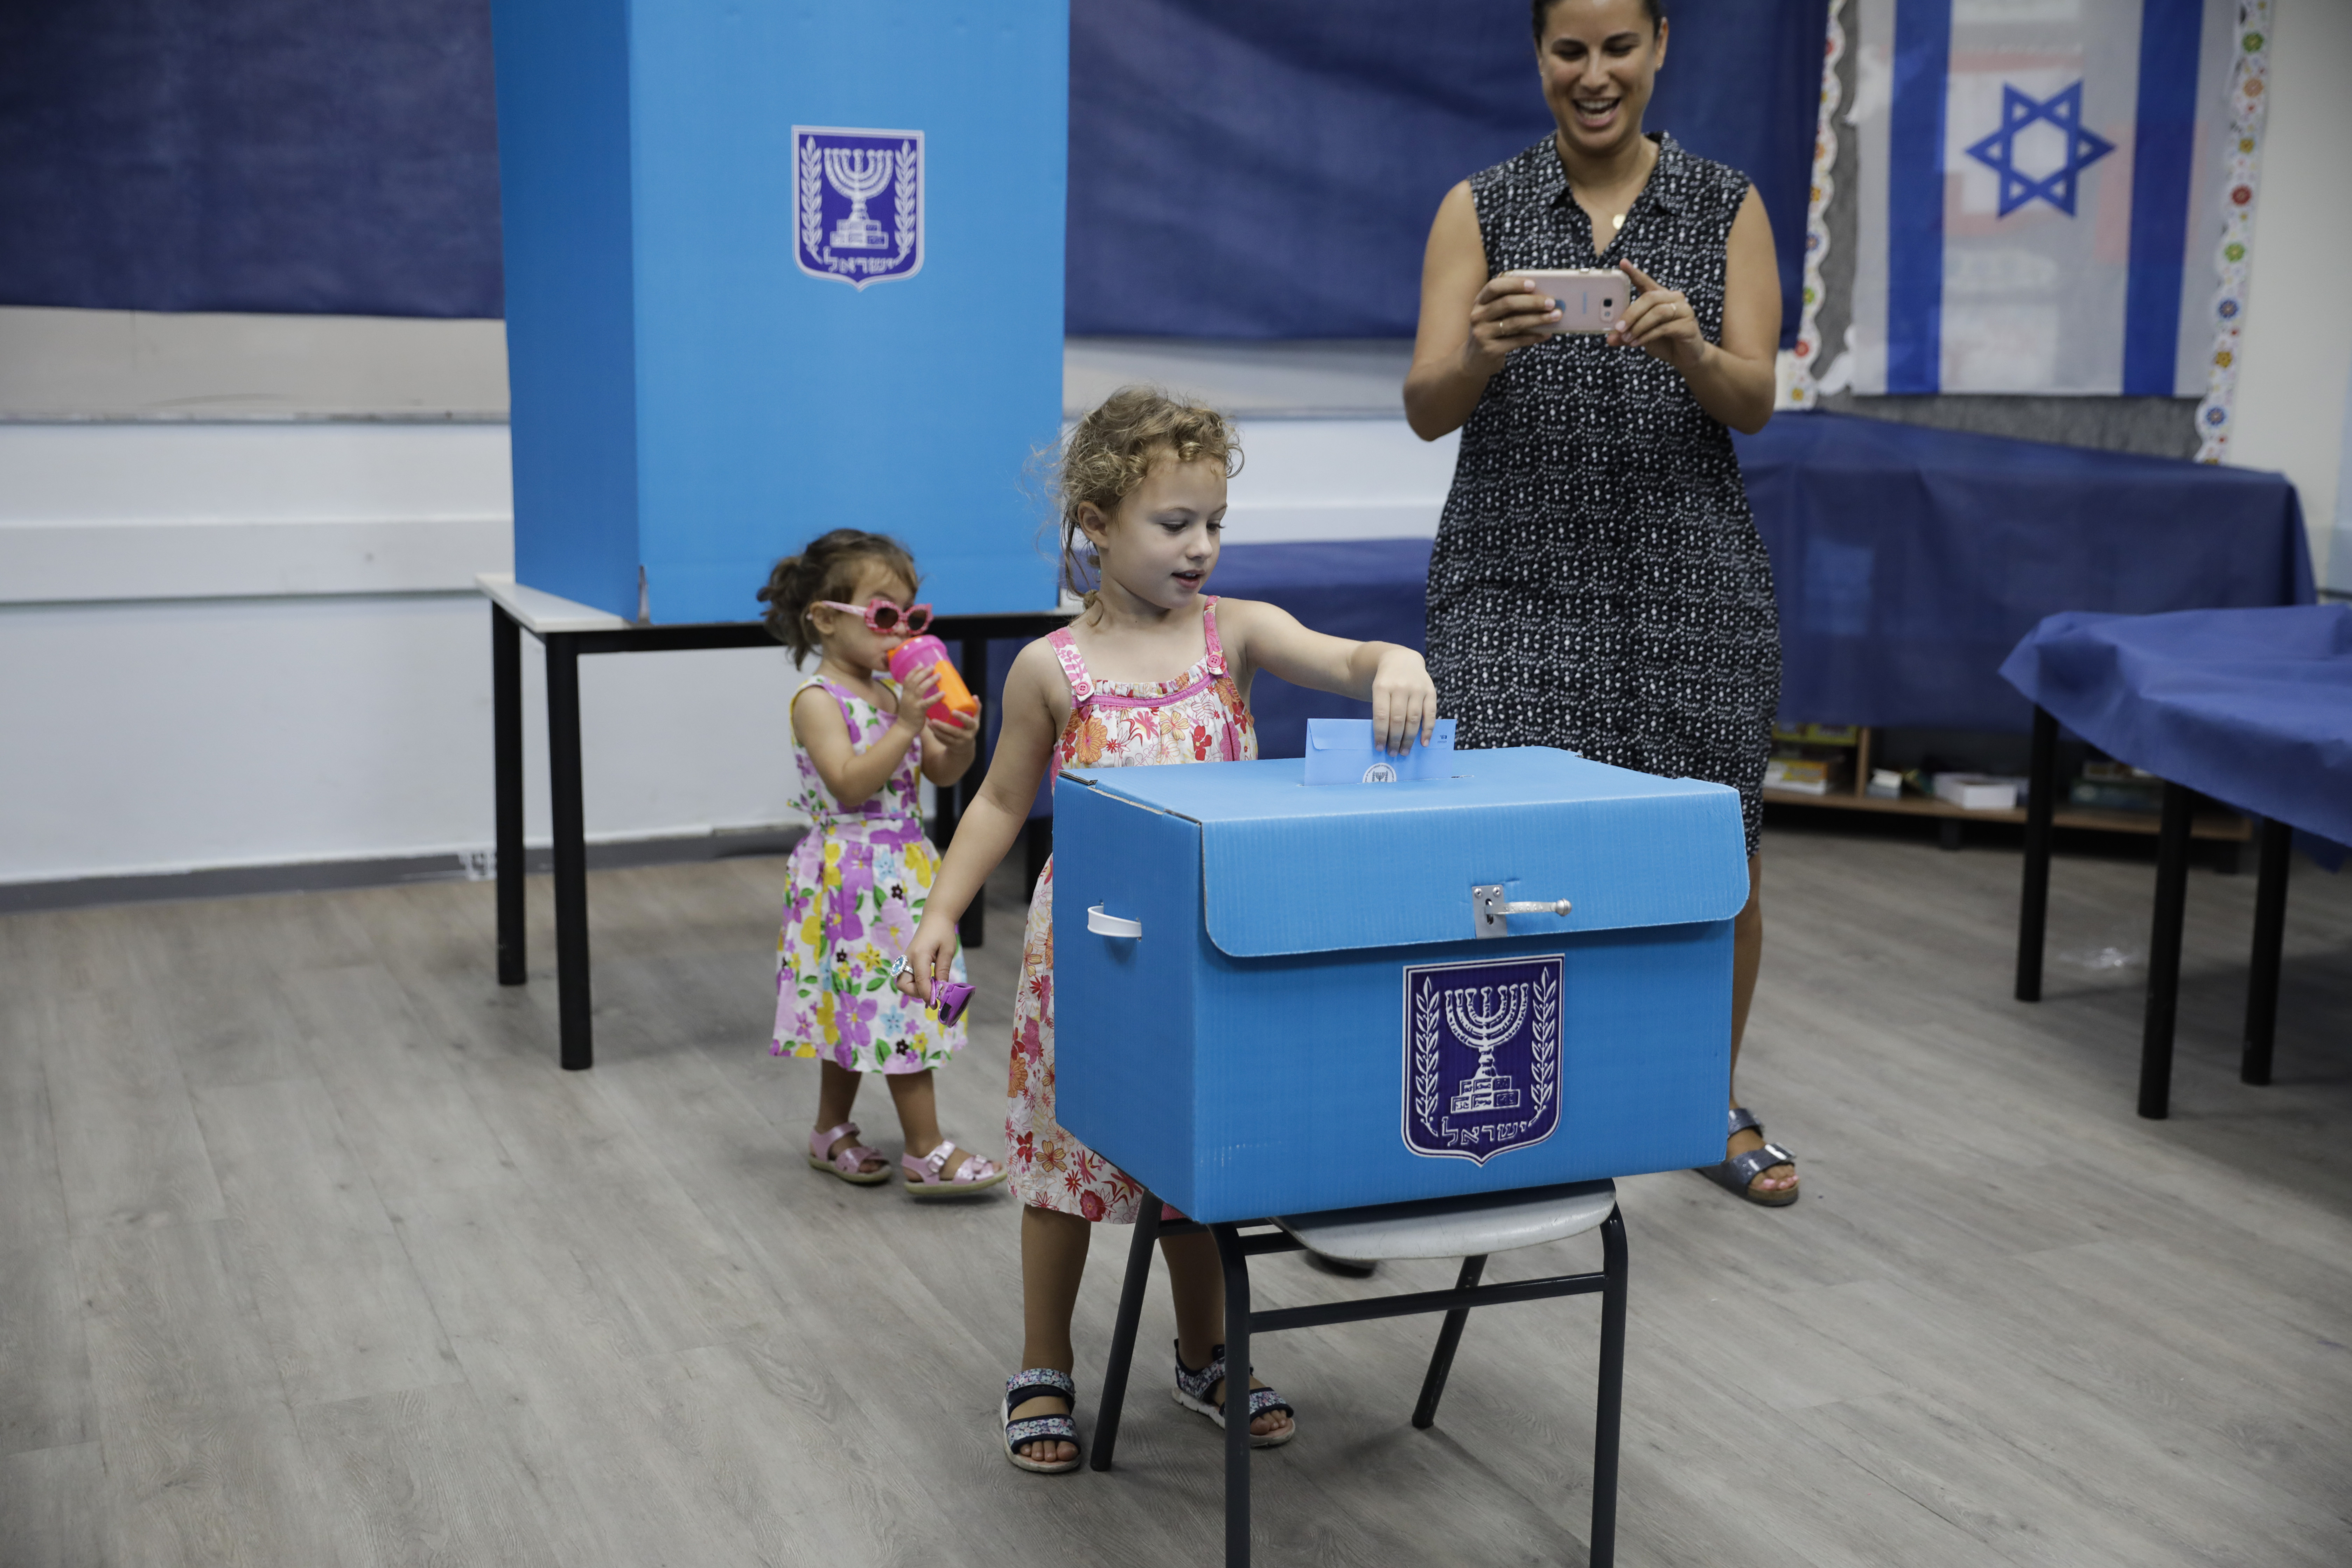 A woman takes a photo of her daughter at a poling station in Rosh Haayin, Israel, Tuesday, Sept. 17, 2019. Israelis began voting Tuesday in an unprecedented repeat election that will decide whether longtime Prime Minister Benjamin Netanyahu stays in power despite a looming indictment on corruption charges. (AP Photo/Sebastian Scheiner)